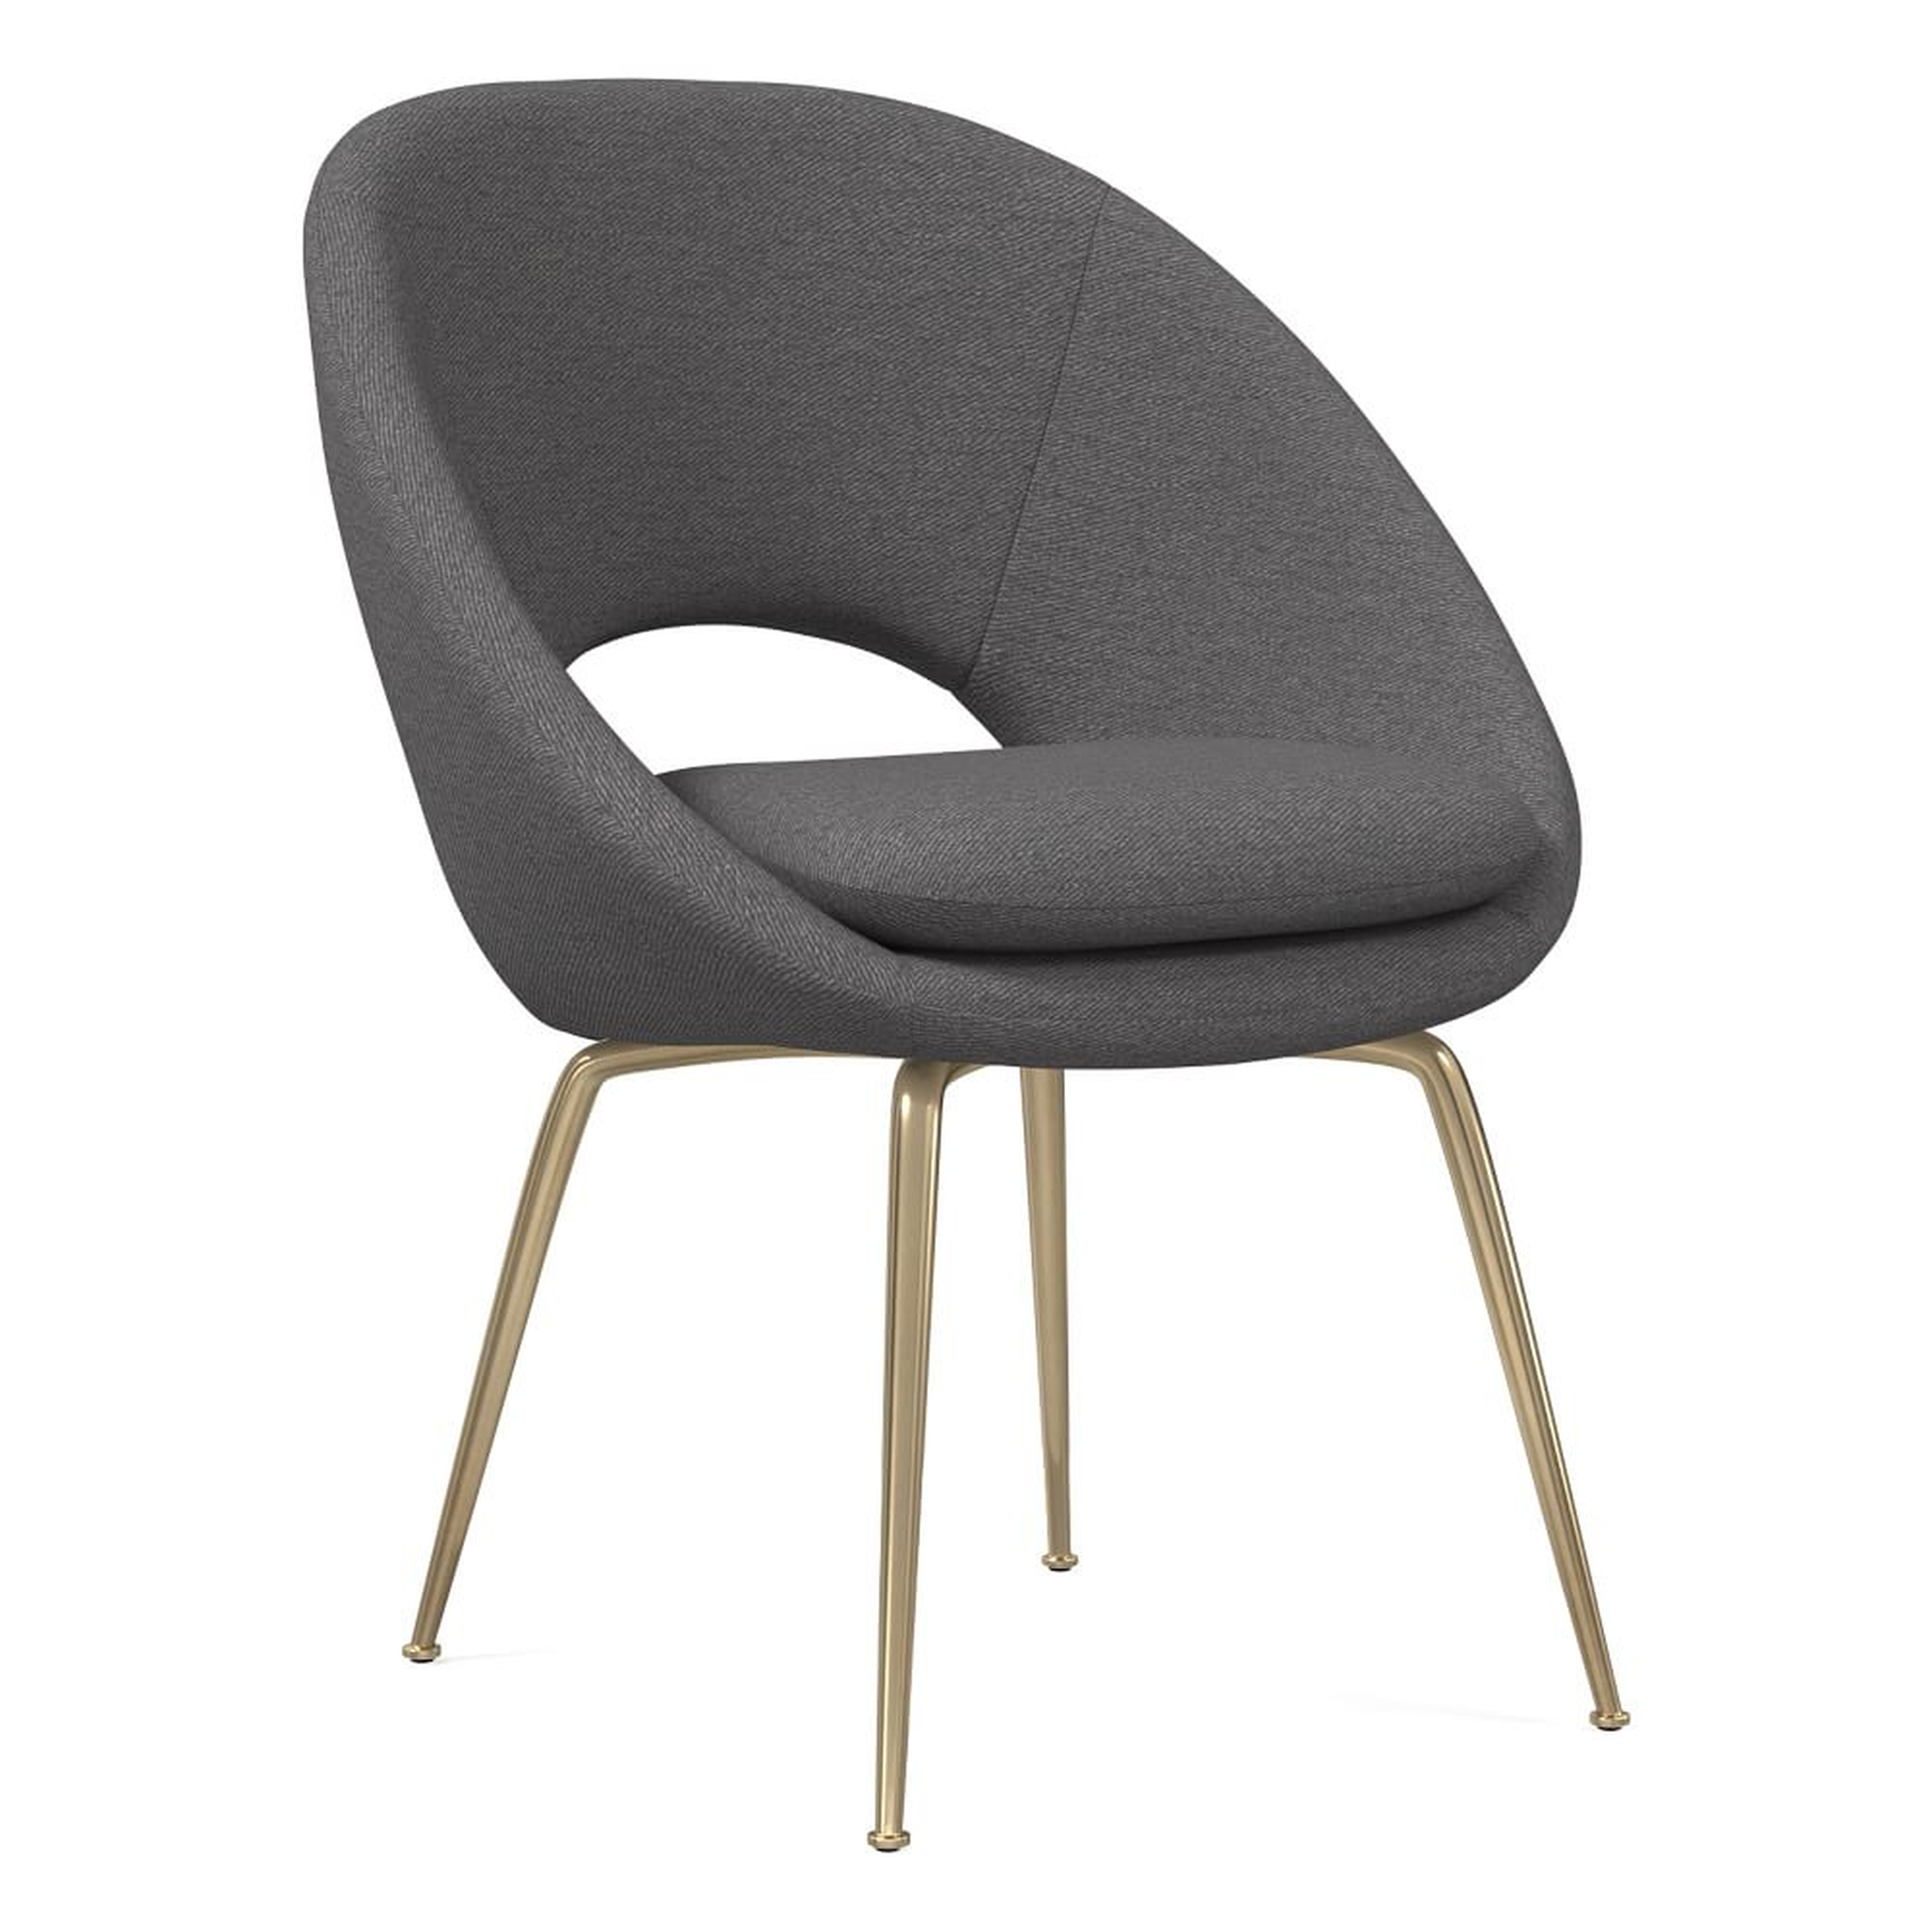 Orb Dining Chair, Twill, Pewter, Antique Brass - West Elm